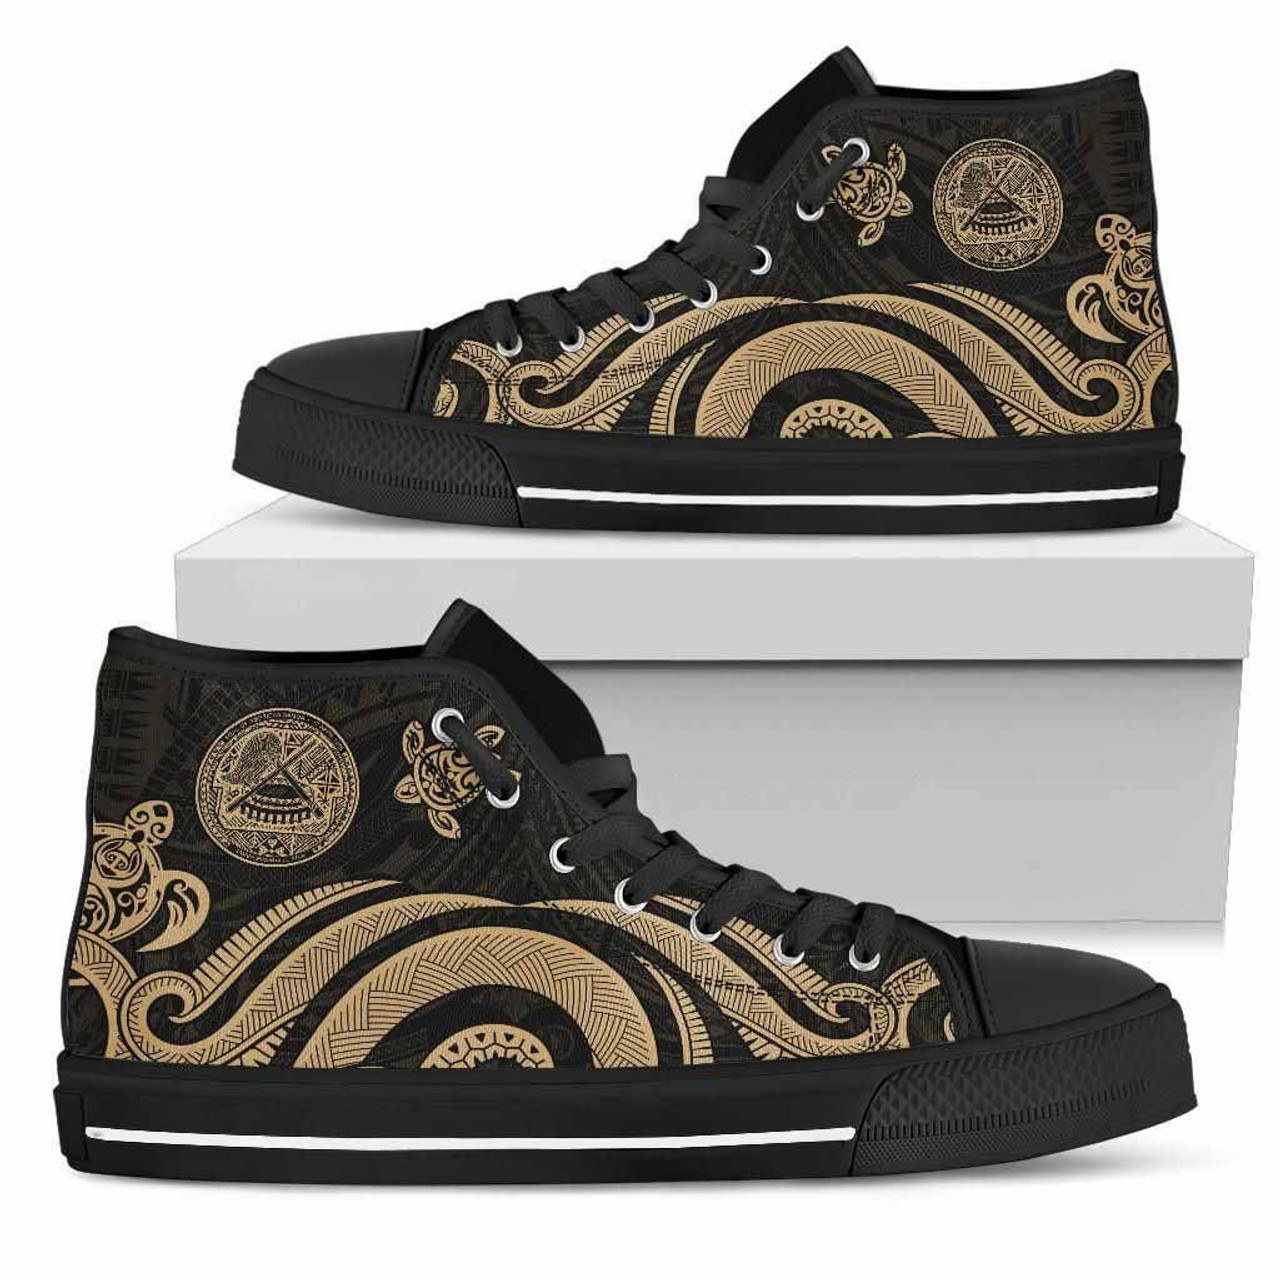 American Samoa High Top Shoes - Gold Tentacle Turtle 1